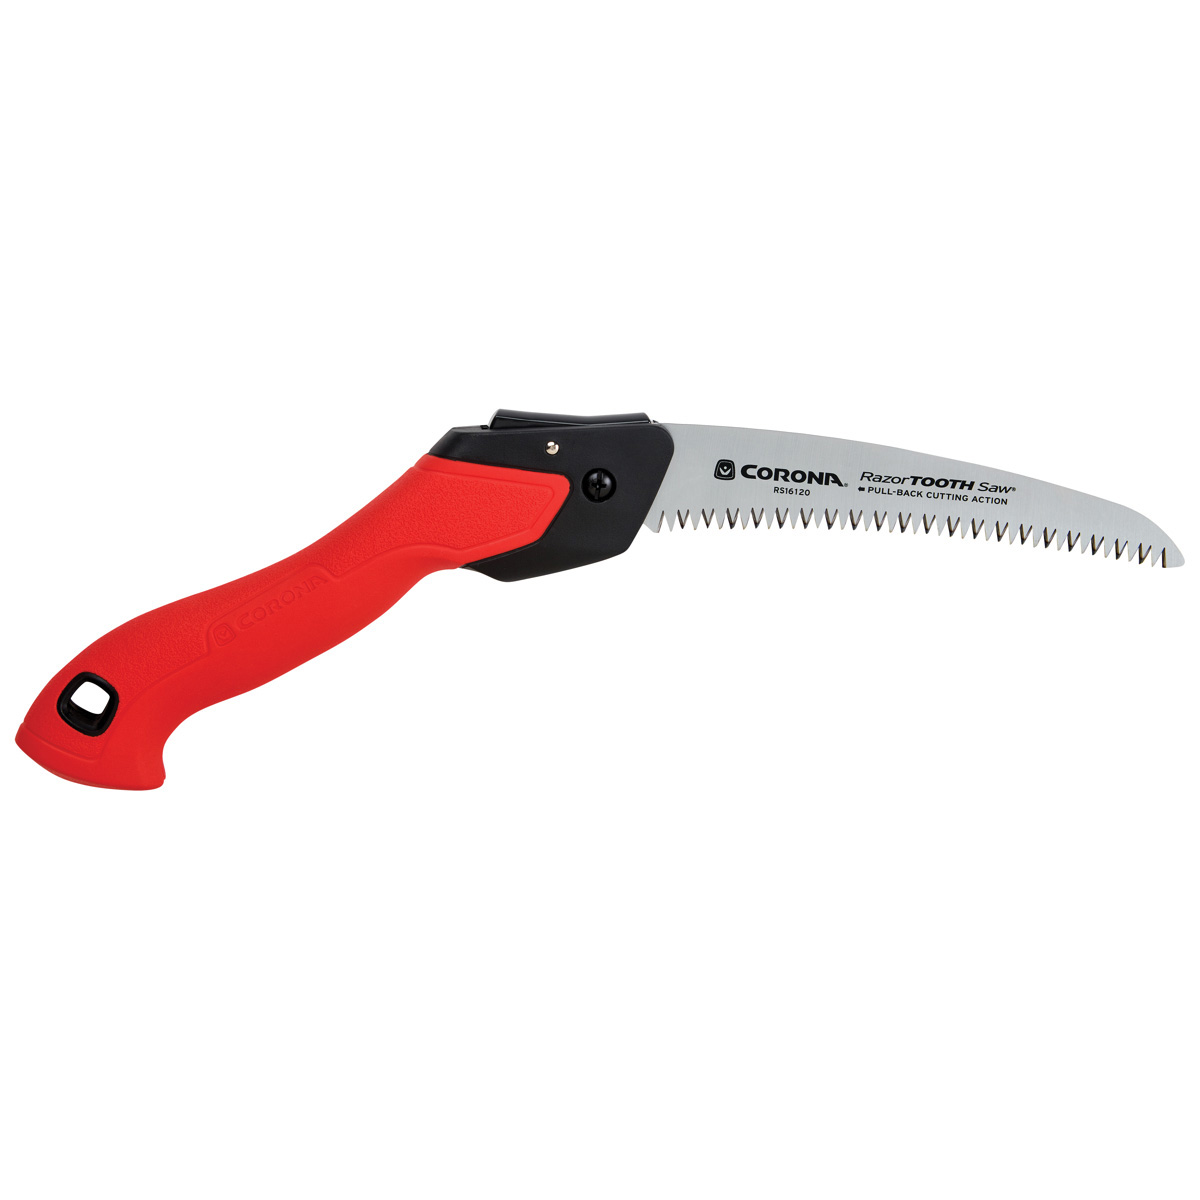 RS16120 Folding Pruning Saw, 7 in Blade, SK5 Steel Blade, 6 TPI, Plastic Handle, Non-Slip Handle